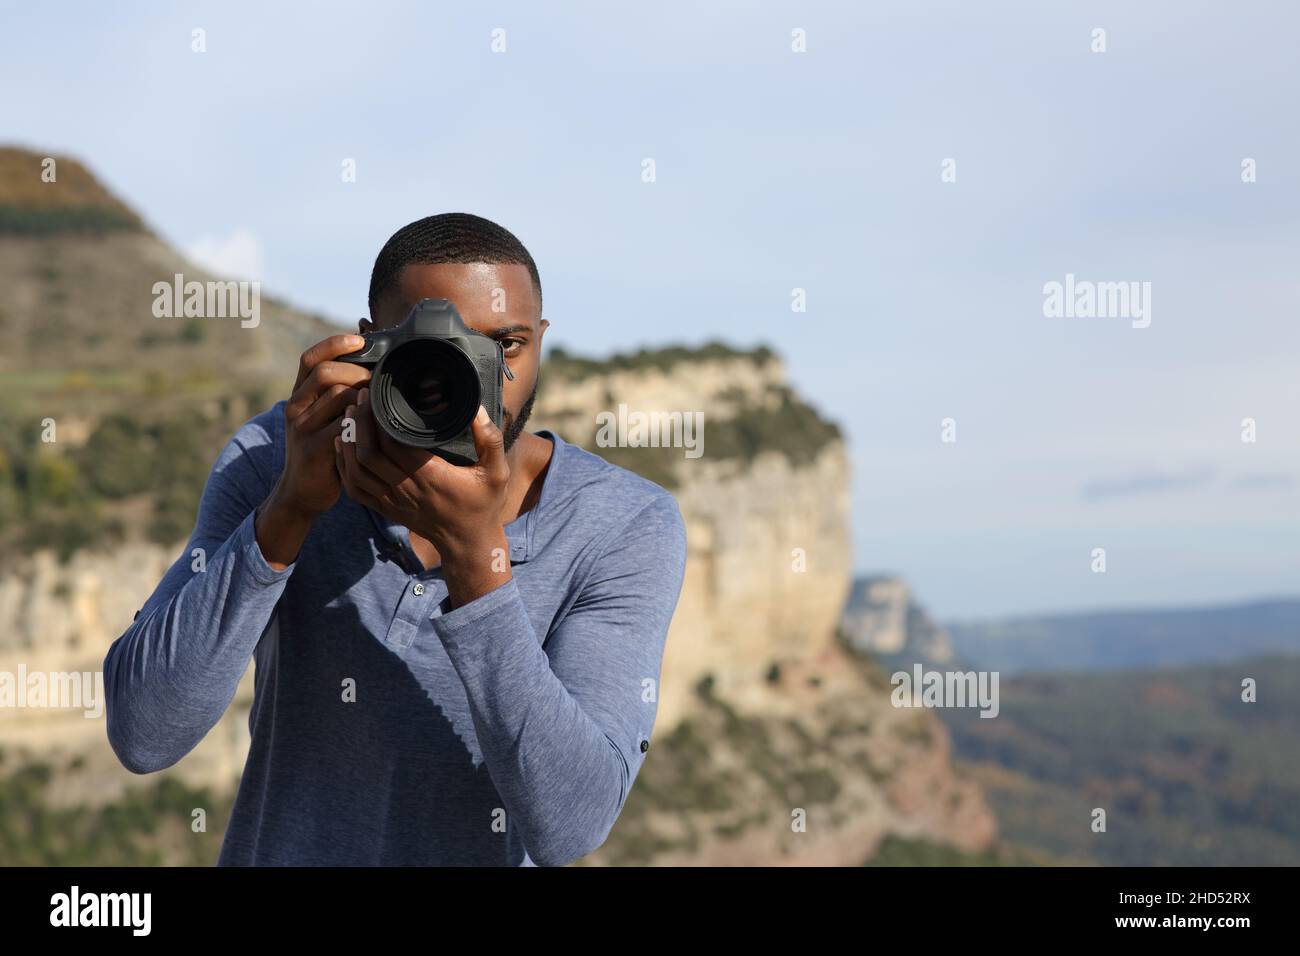 Front view portrait of a man with black skin taking photos with camera dslr in the mountain Stock Photo